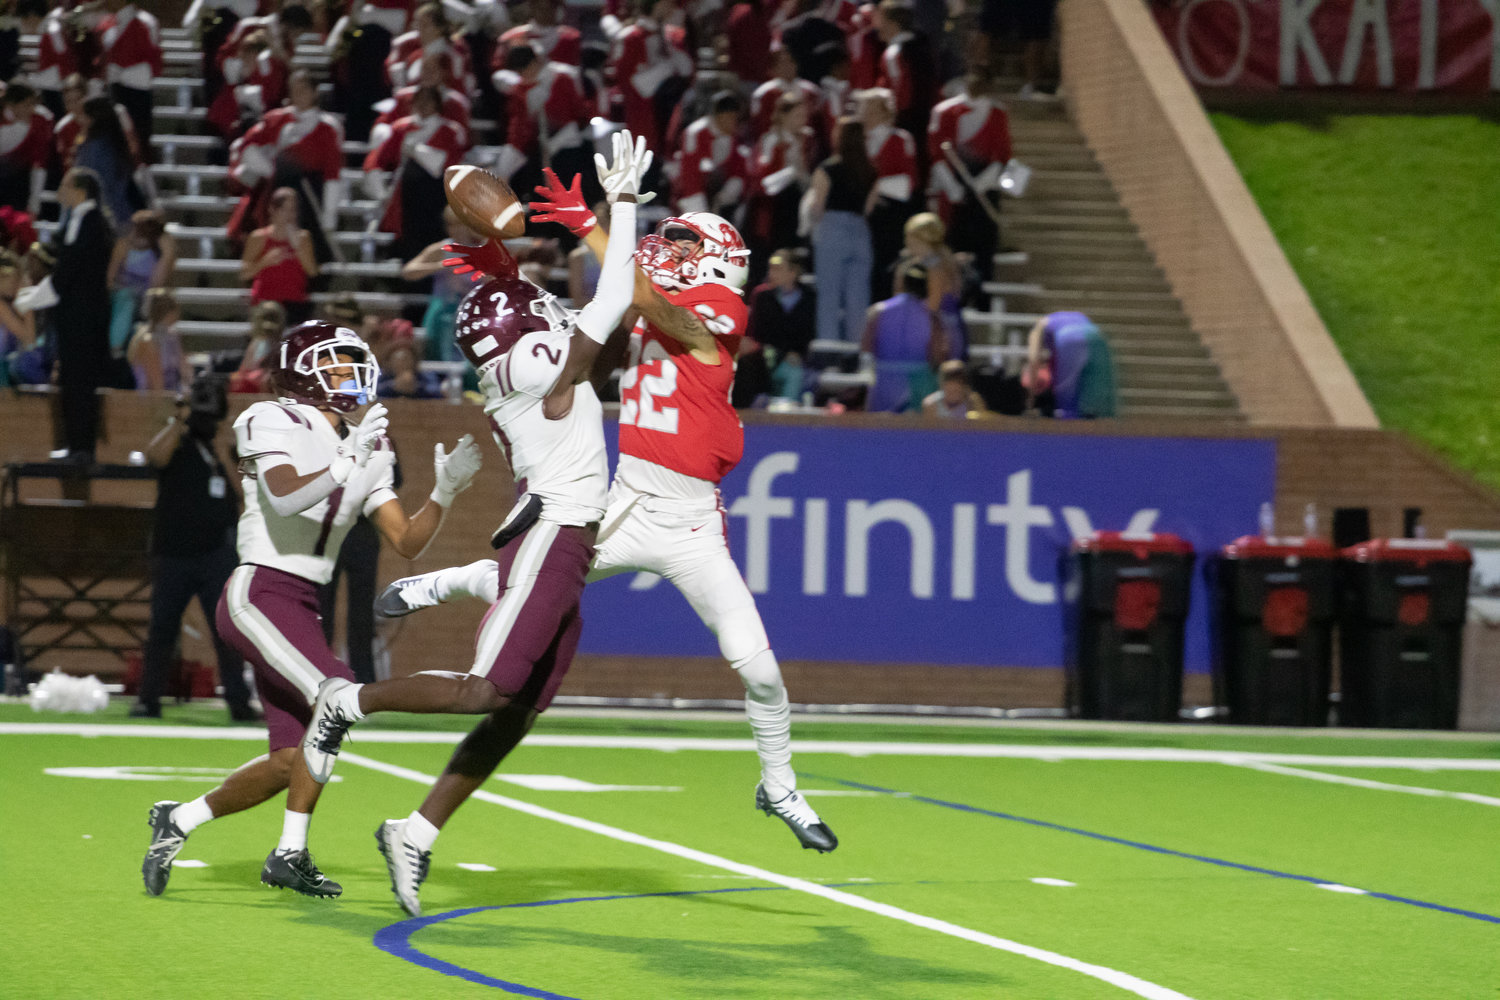 Katy's Adam Jackson brings in a catch while being covered by Cinco Ranch's Superior Hill during Friday's game between Katy and Cinco Ranch at Rhodes Stadium.